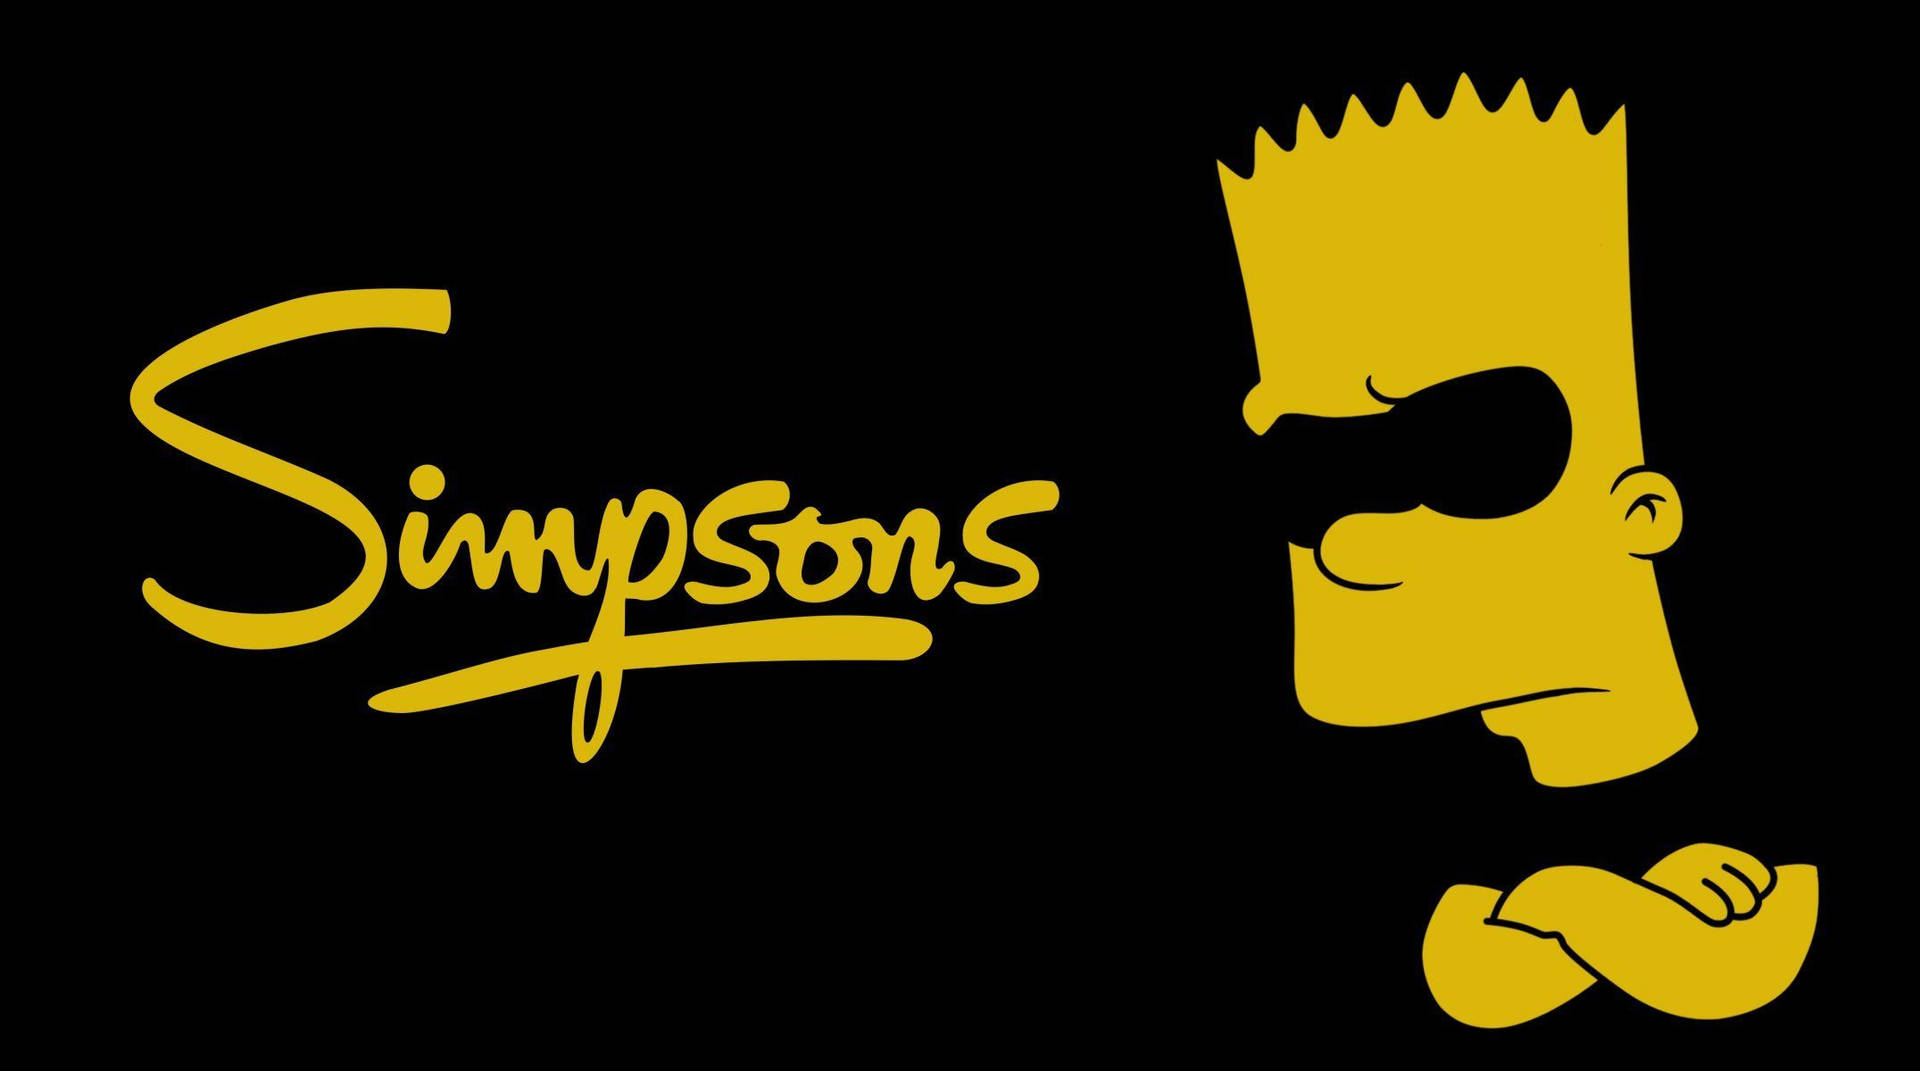 Cool Bart Simpson With Black Eyes